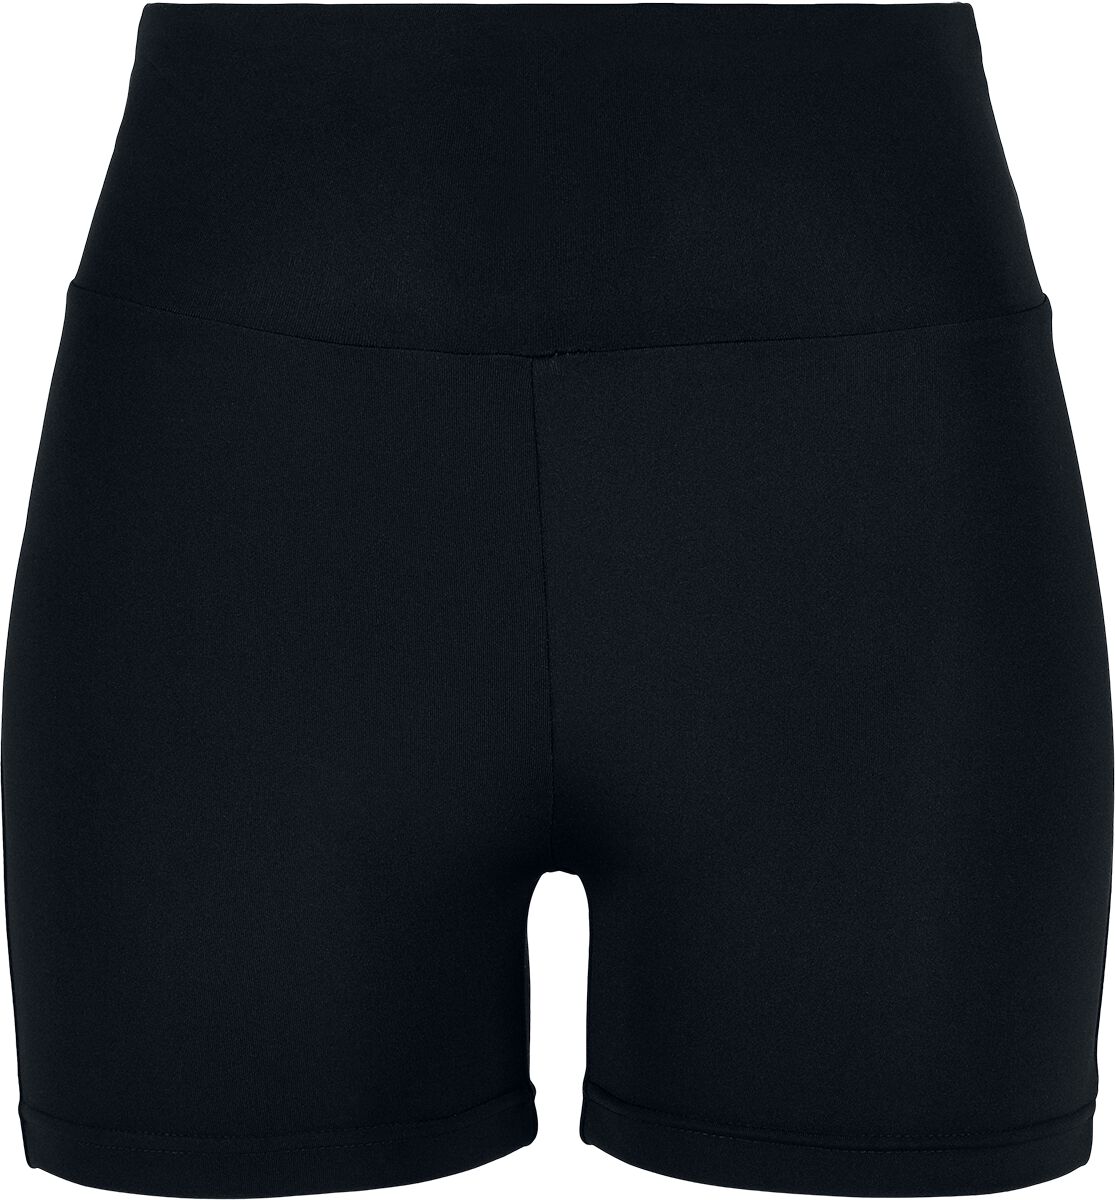 Image of Hot Pants di Urban Classics - Ladies’ recycled high-waist cycling hot pants - XS a XL - Donna - nero